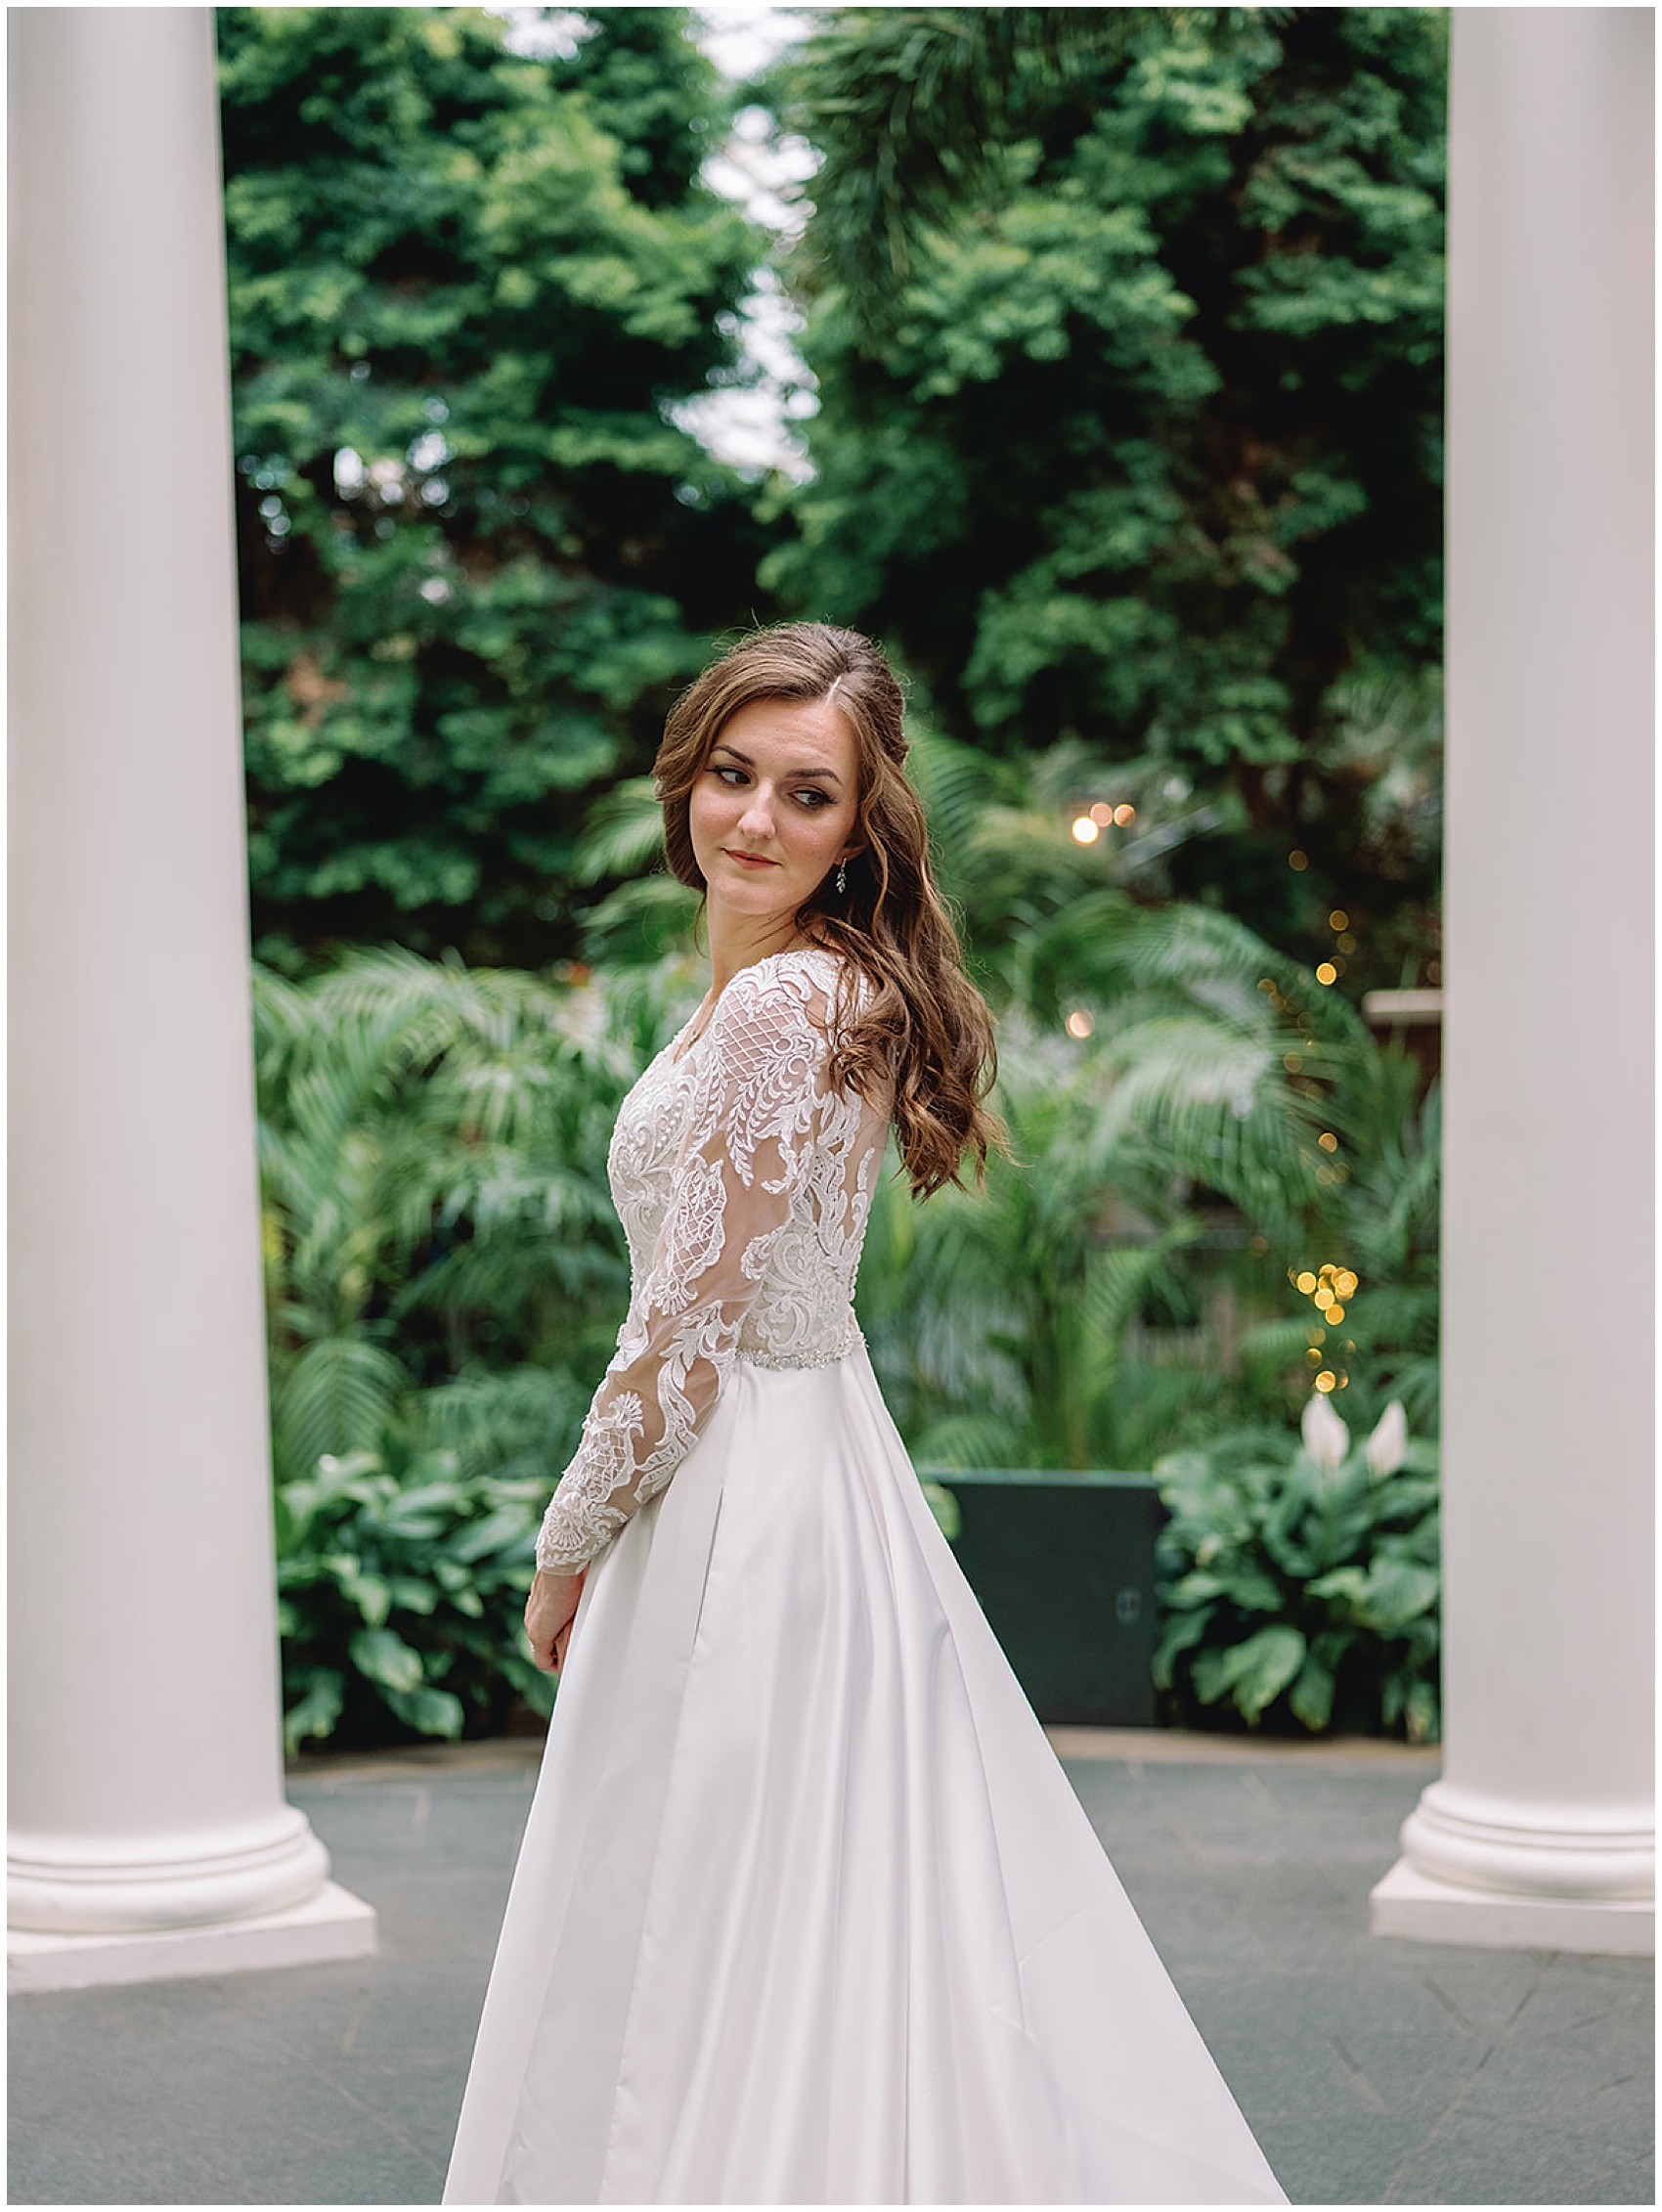 A bride looks over her shoulder in a lace embroidered dress in a garden